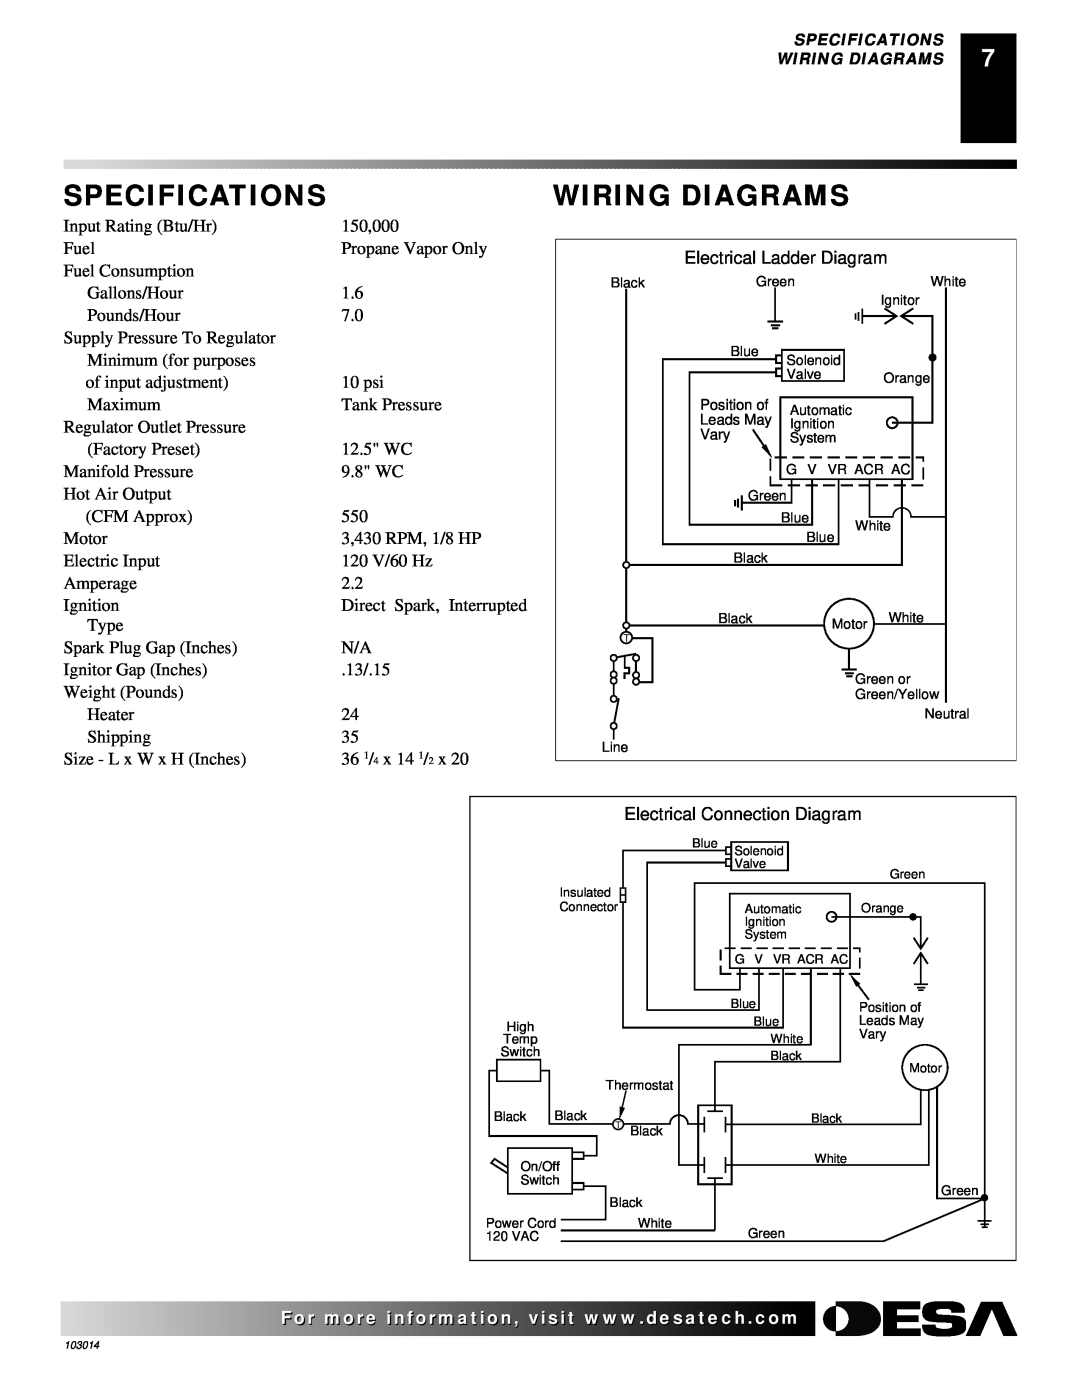 Desa LP155AT owner manual Specifications, Wiring Diagrams 